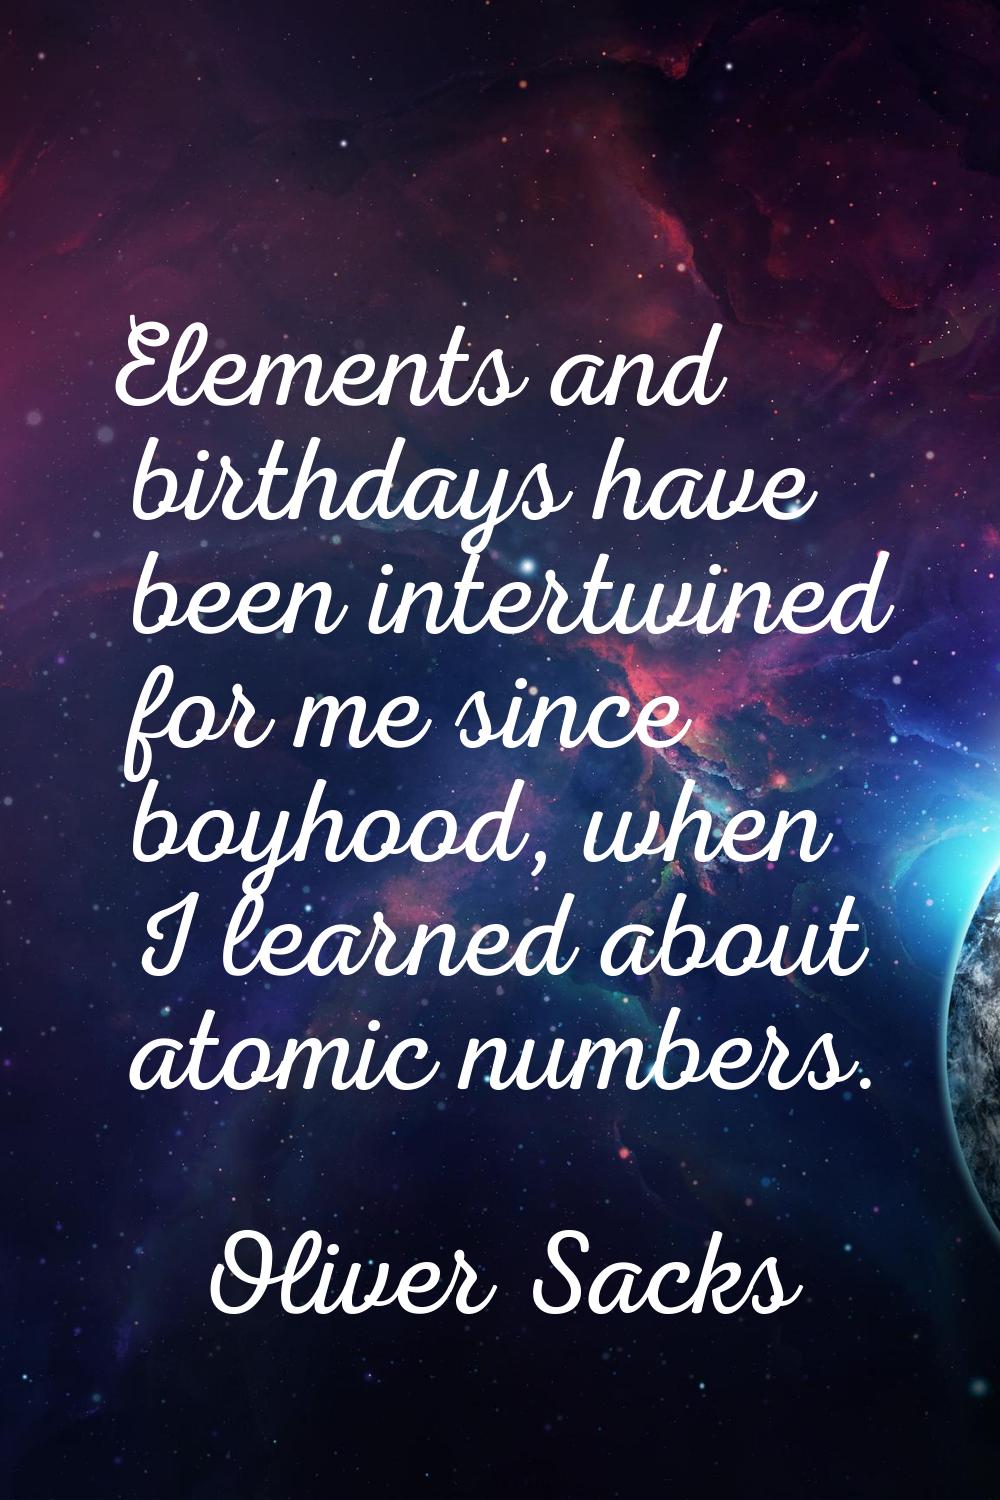 Elements and birthdays have been intertwined for me since boyhood, when I learned about atomic numb